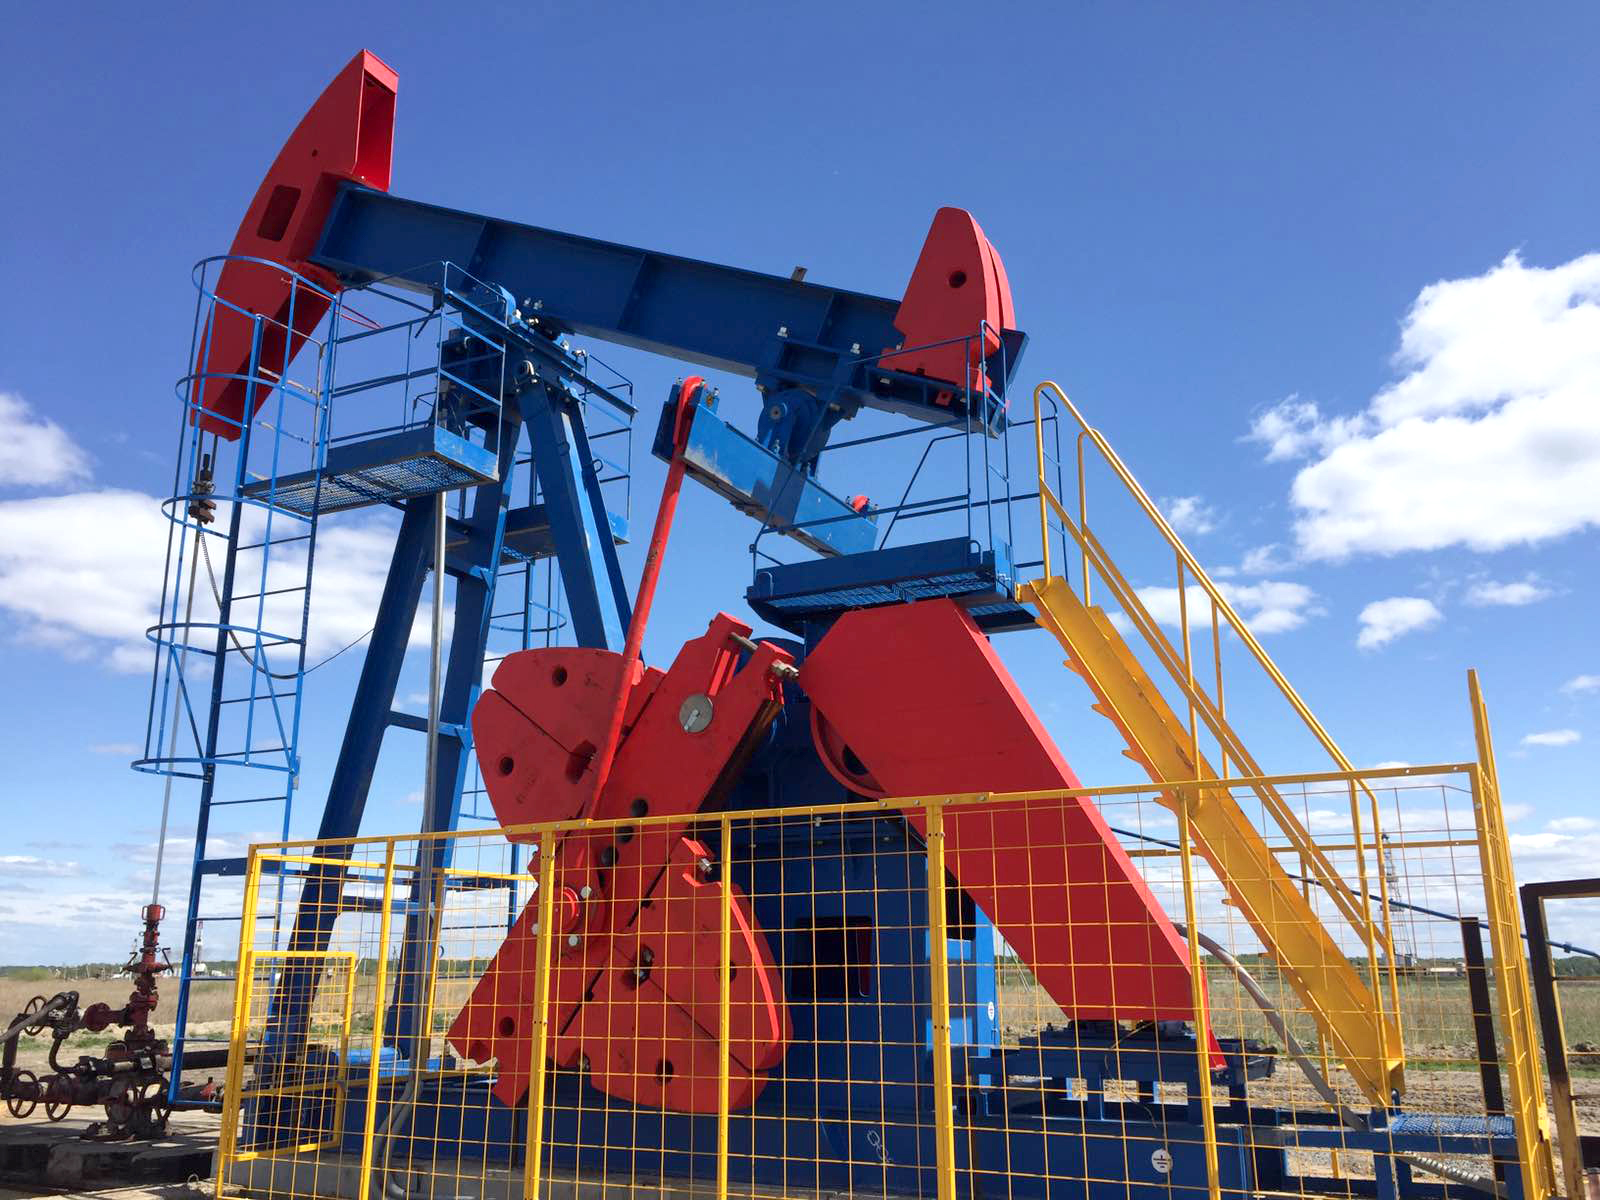 Rimera Group supplied new oil production equipment to Belarus and Uzbekistan